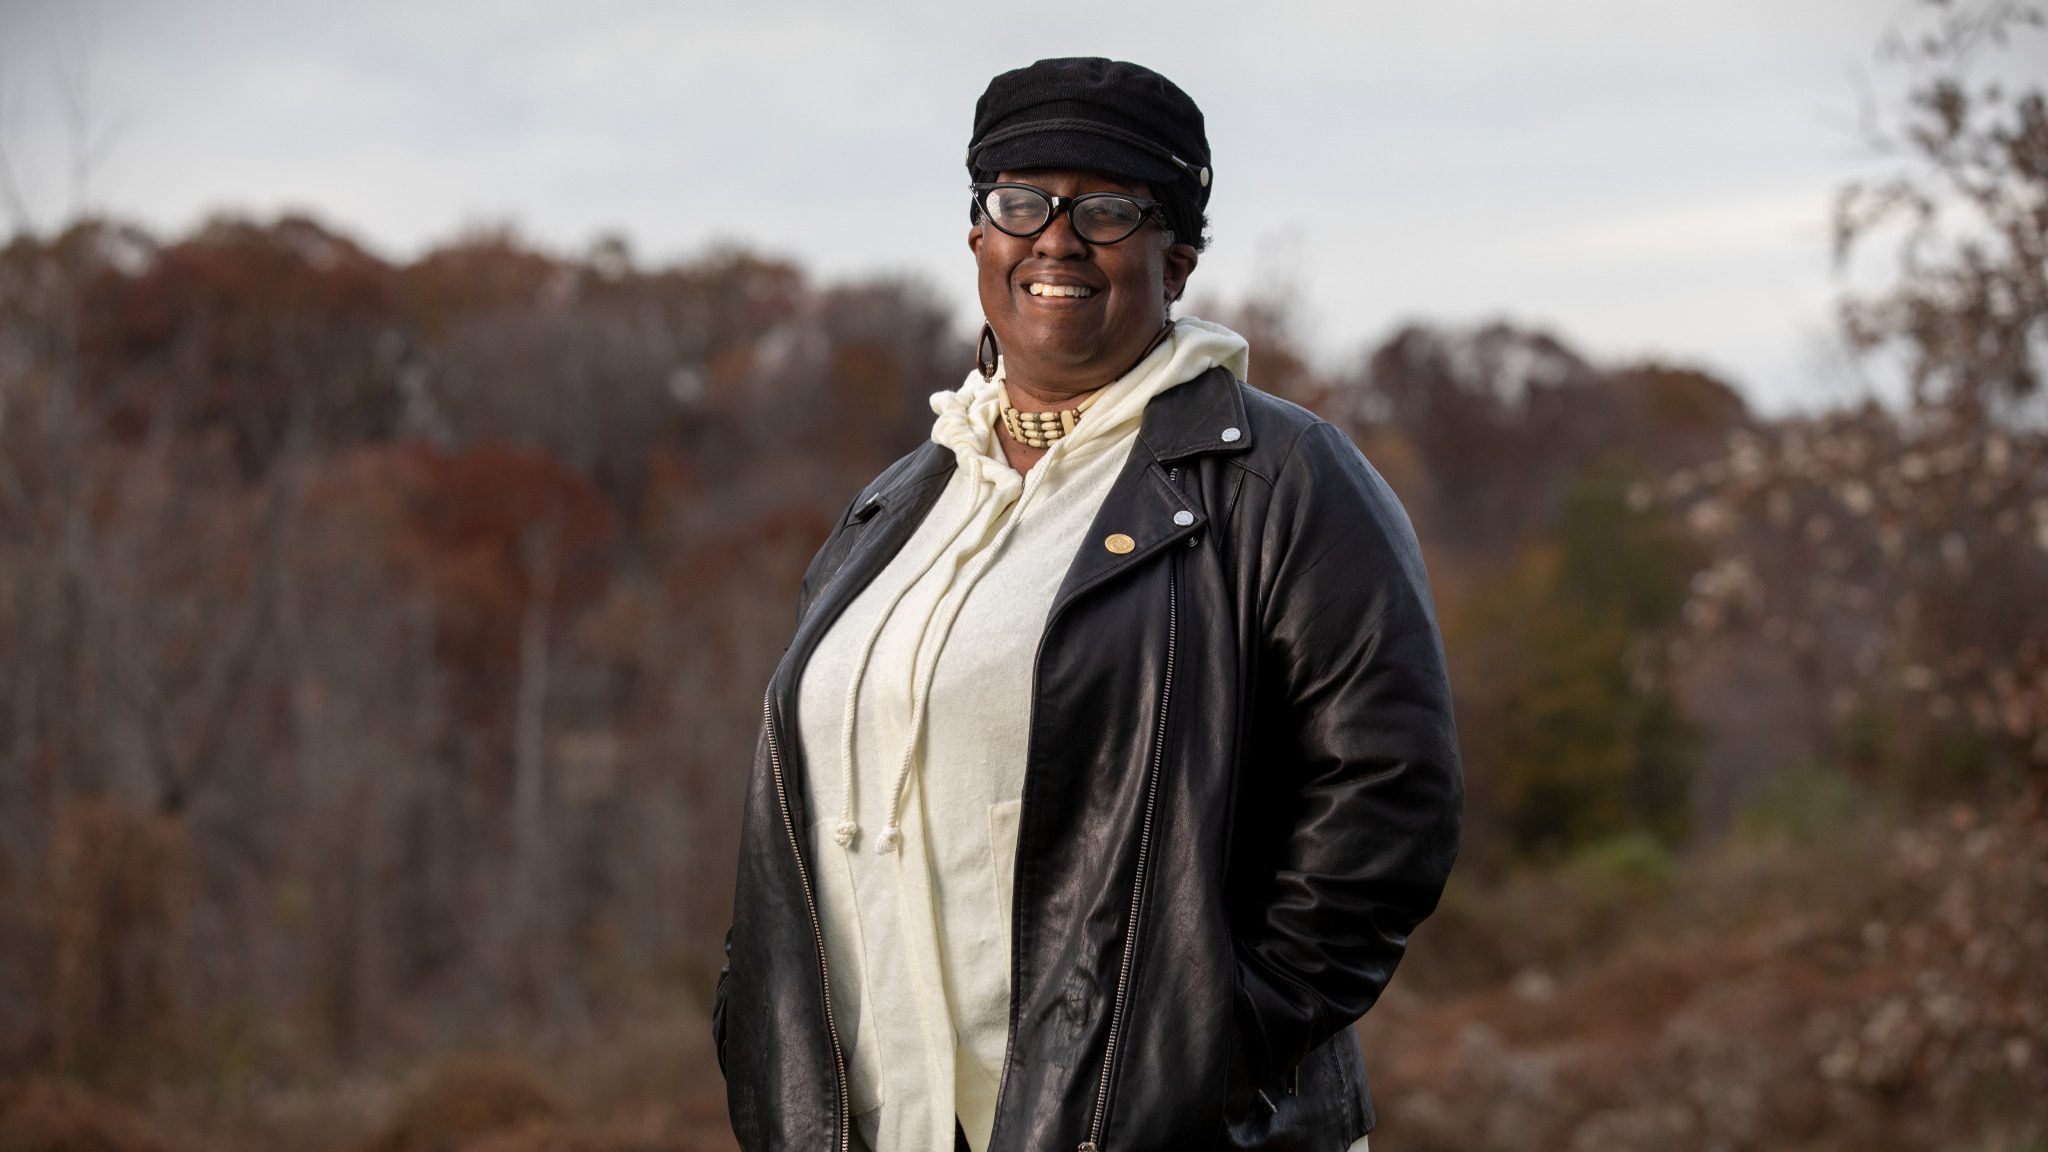 Jacqueline Patterson's work has addressed racial, economic and climate justice; gender justice; and HIV and Aids